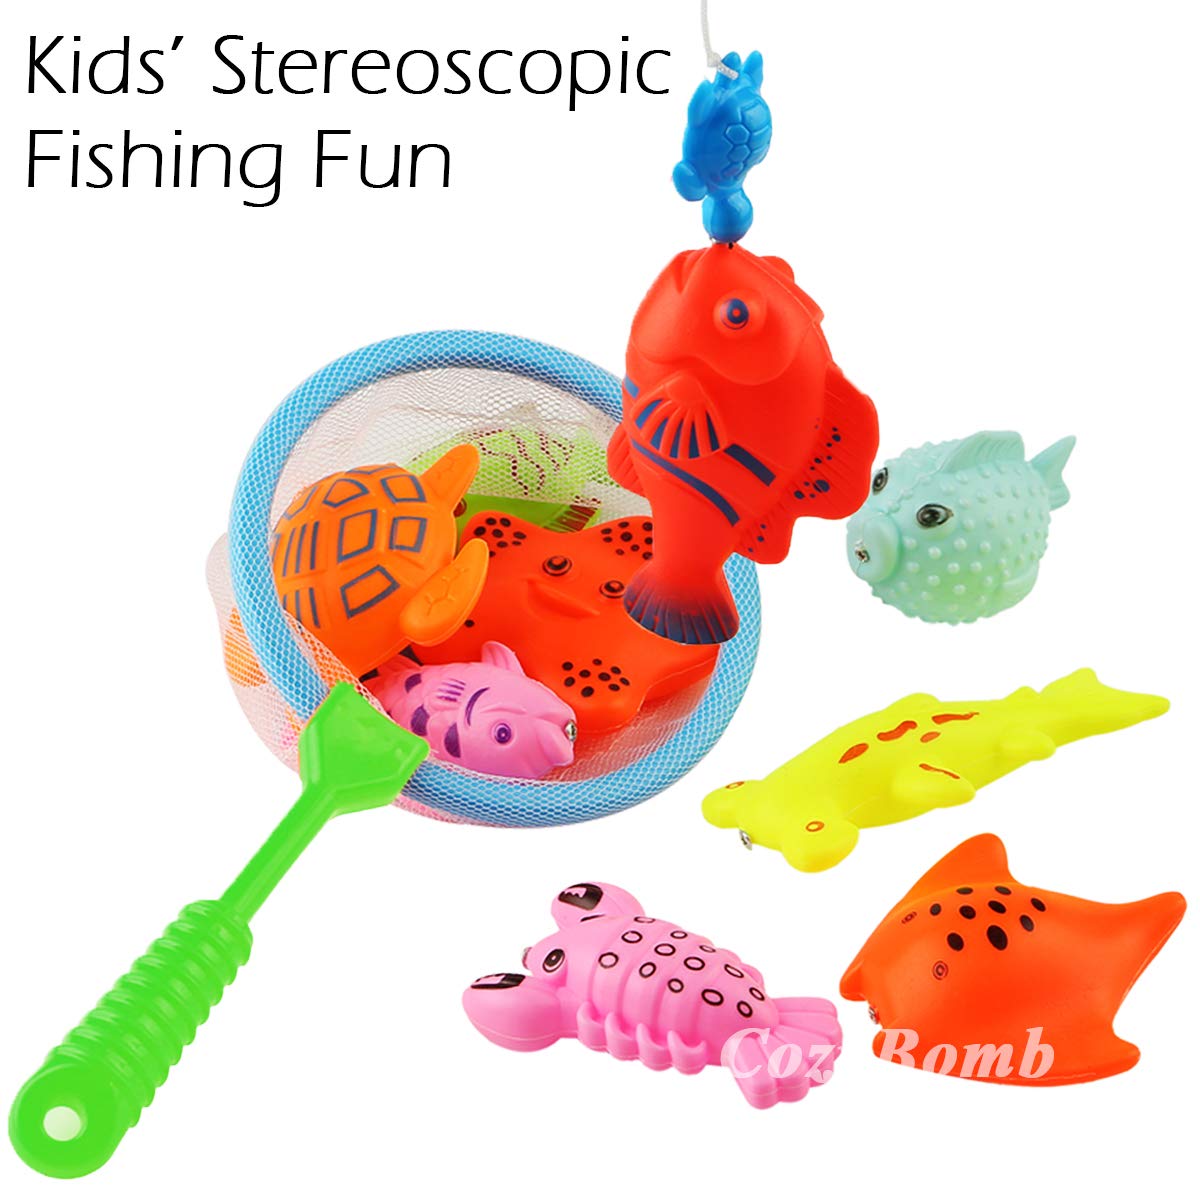 Baby Products Online - CozyBomB Magnetic Fishing Game for Kids - Pool Toys  for Water Table Bathtub Learning Learning Fishin's Bath Fun Fun with 4  Squeaks Rubber Animal and Boat, Fish Rod